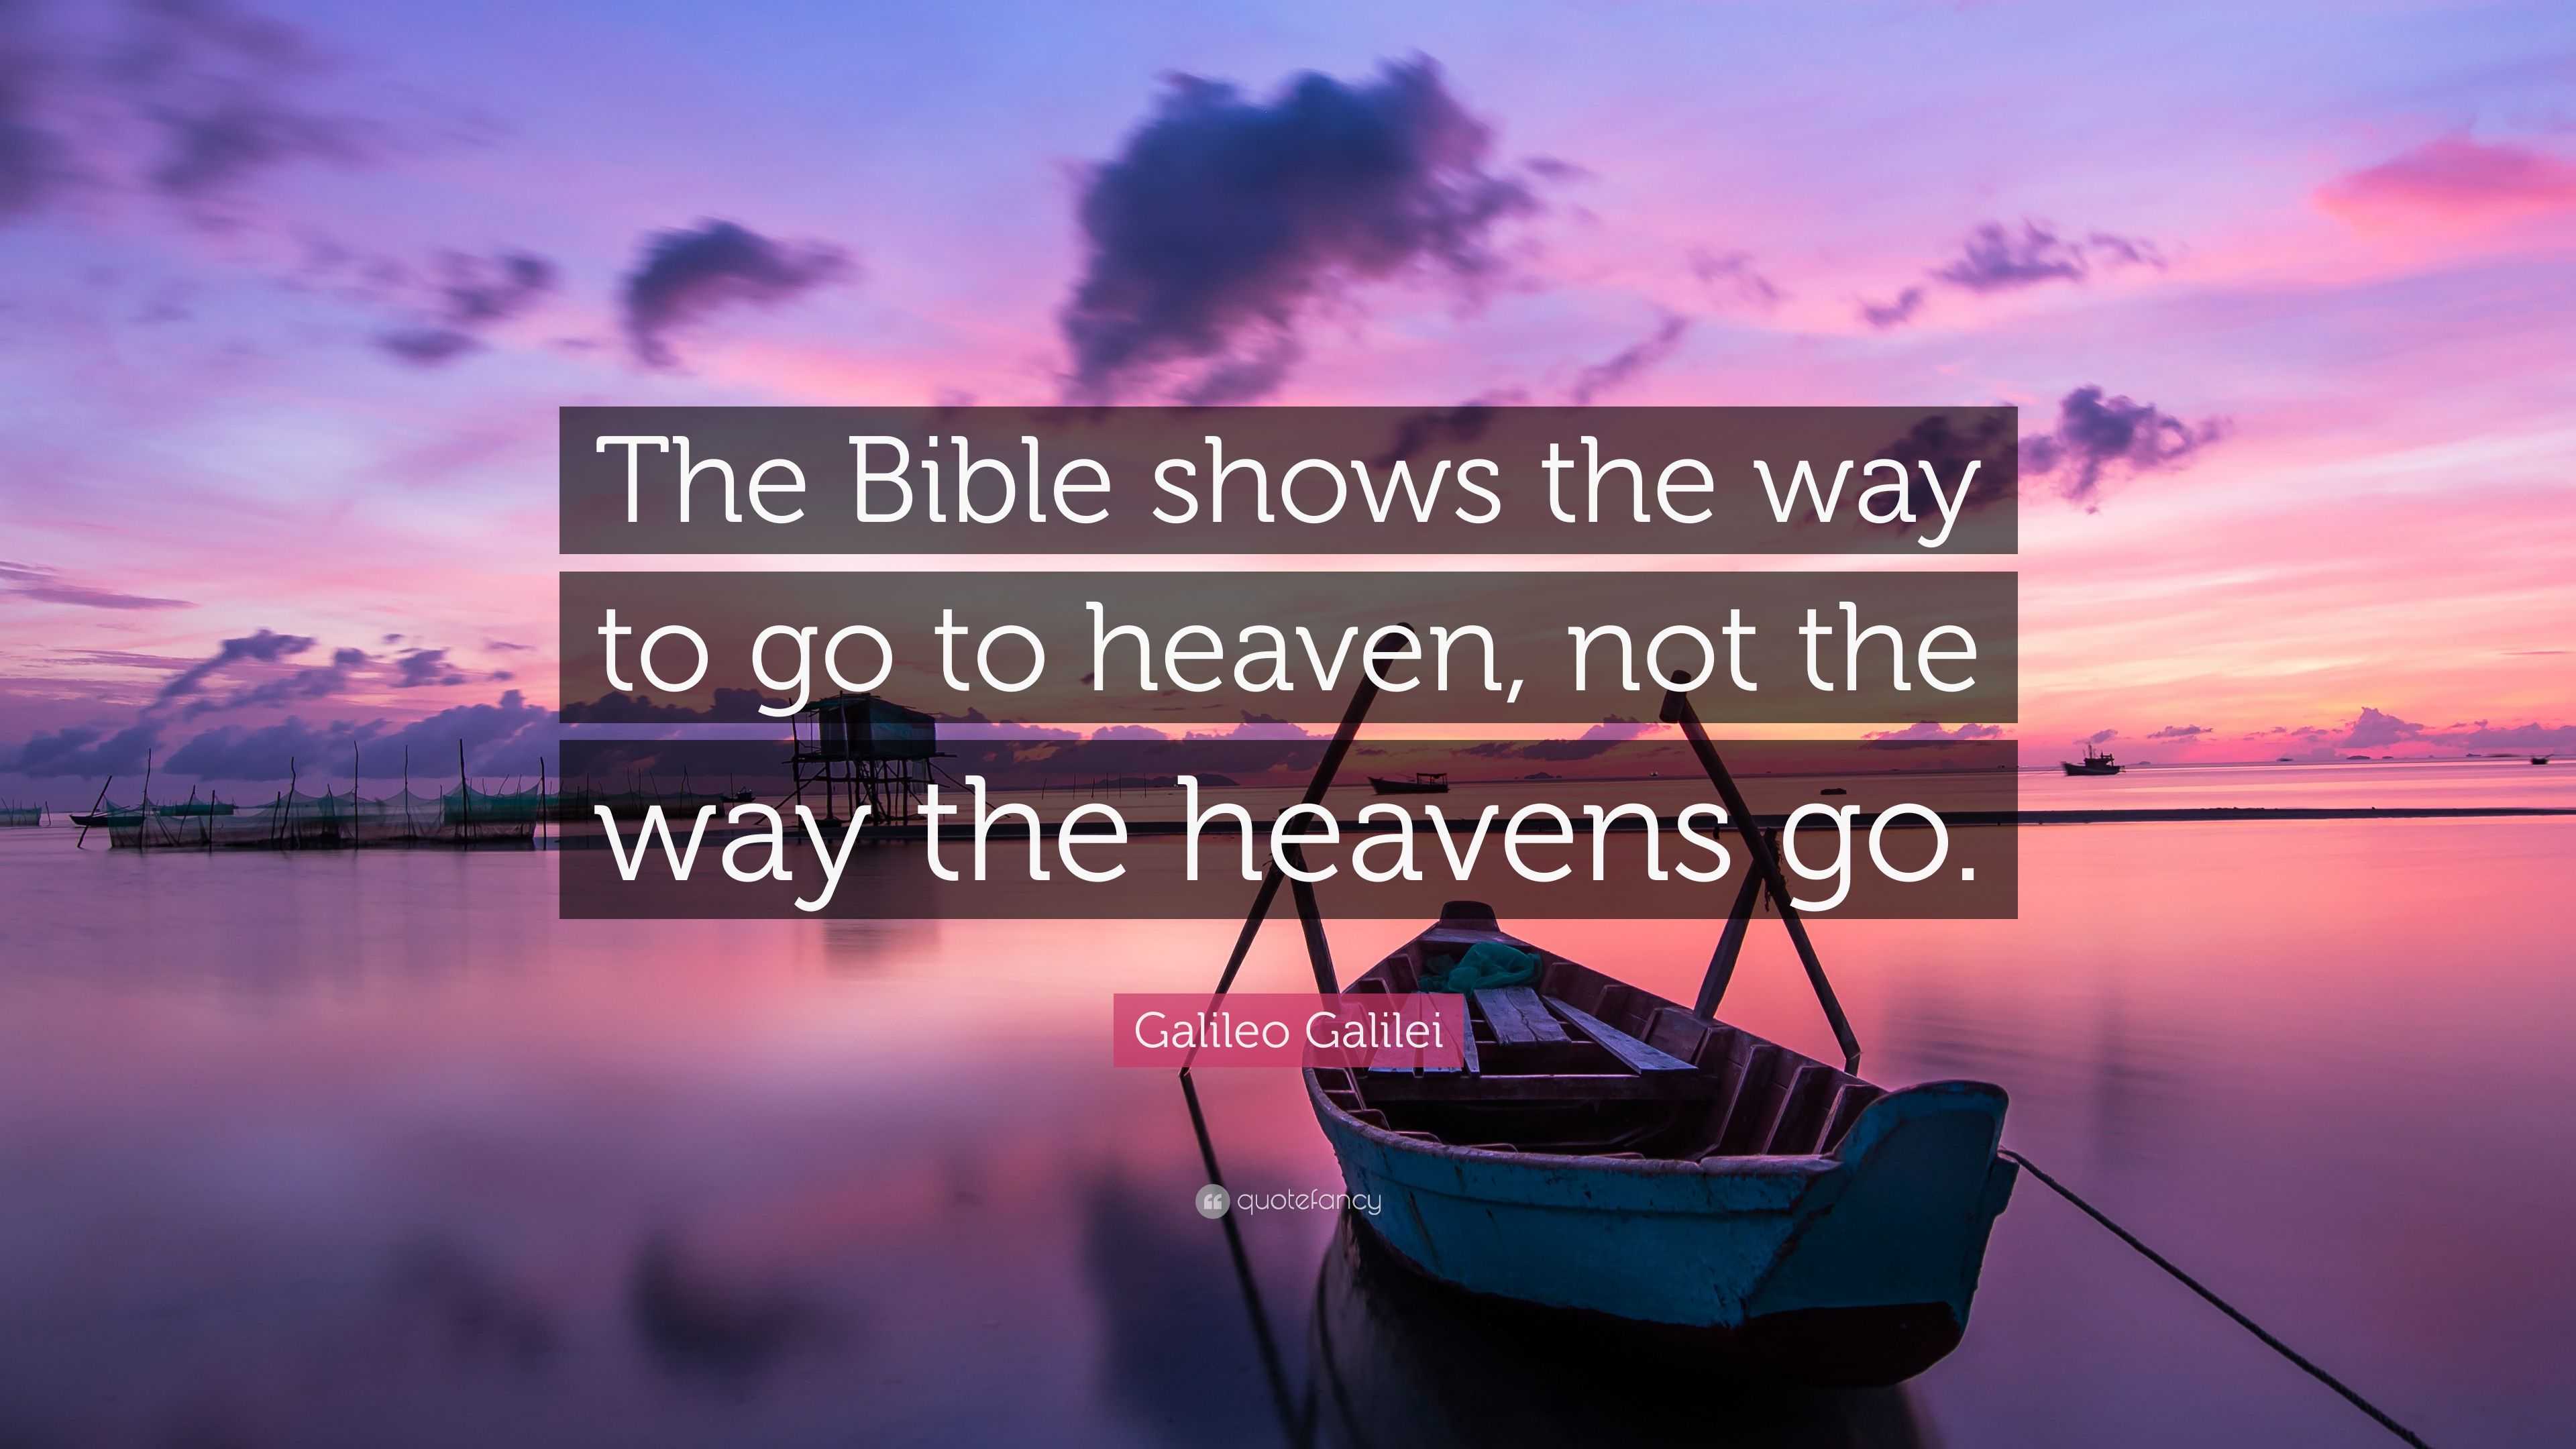 Galileo Galilei Quote: “The Bible shows the way to go to heaven, not ...